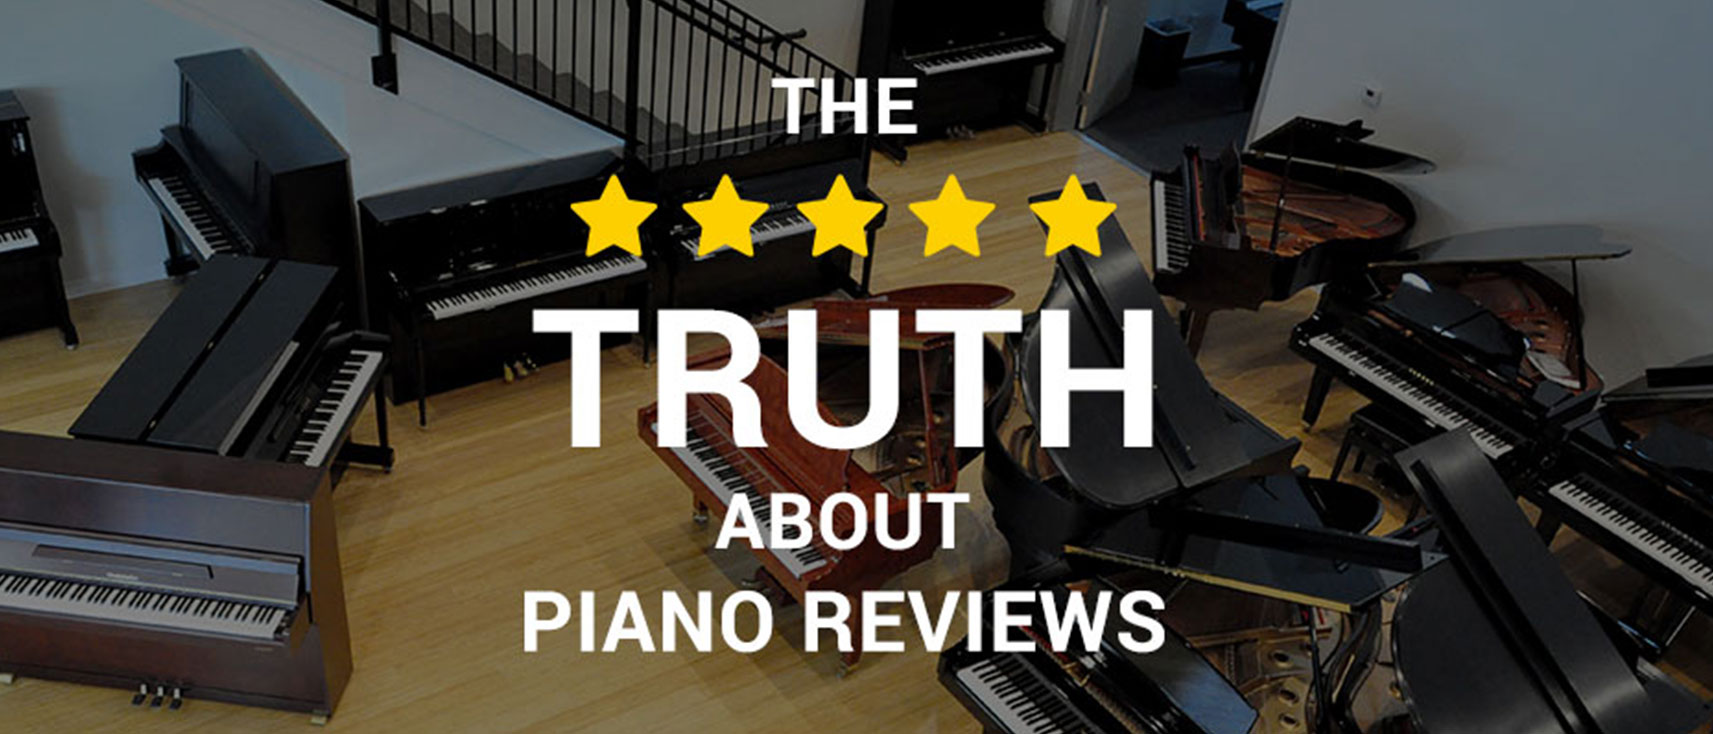 The Truth About Piano Reviews